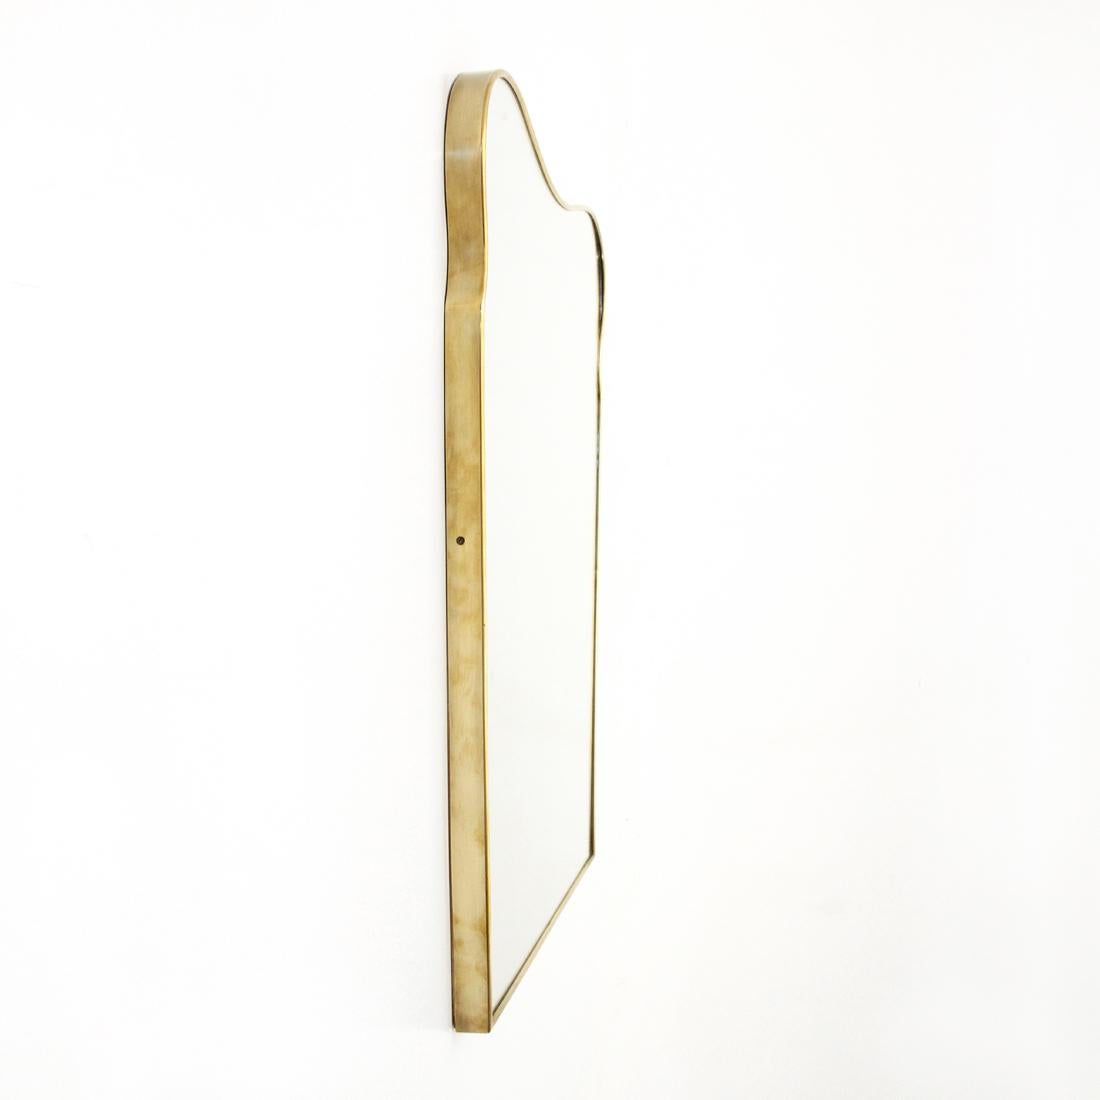 Italian-made mirror produced in the 1950s.
Wooden structure.
Brass frame.
Mirrored glass.
Good general condition, some signs of normal use over time.

Dimensions: Length 60 cm - Depth 3 cm - Height 75 cm.
 